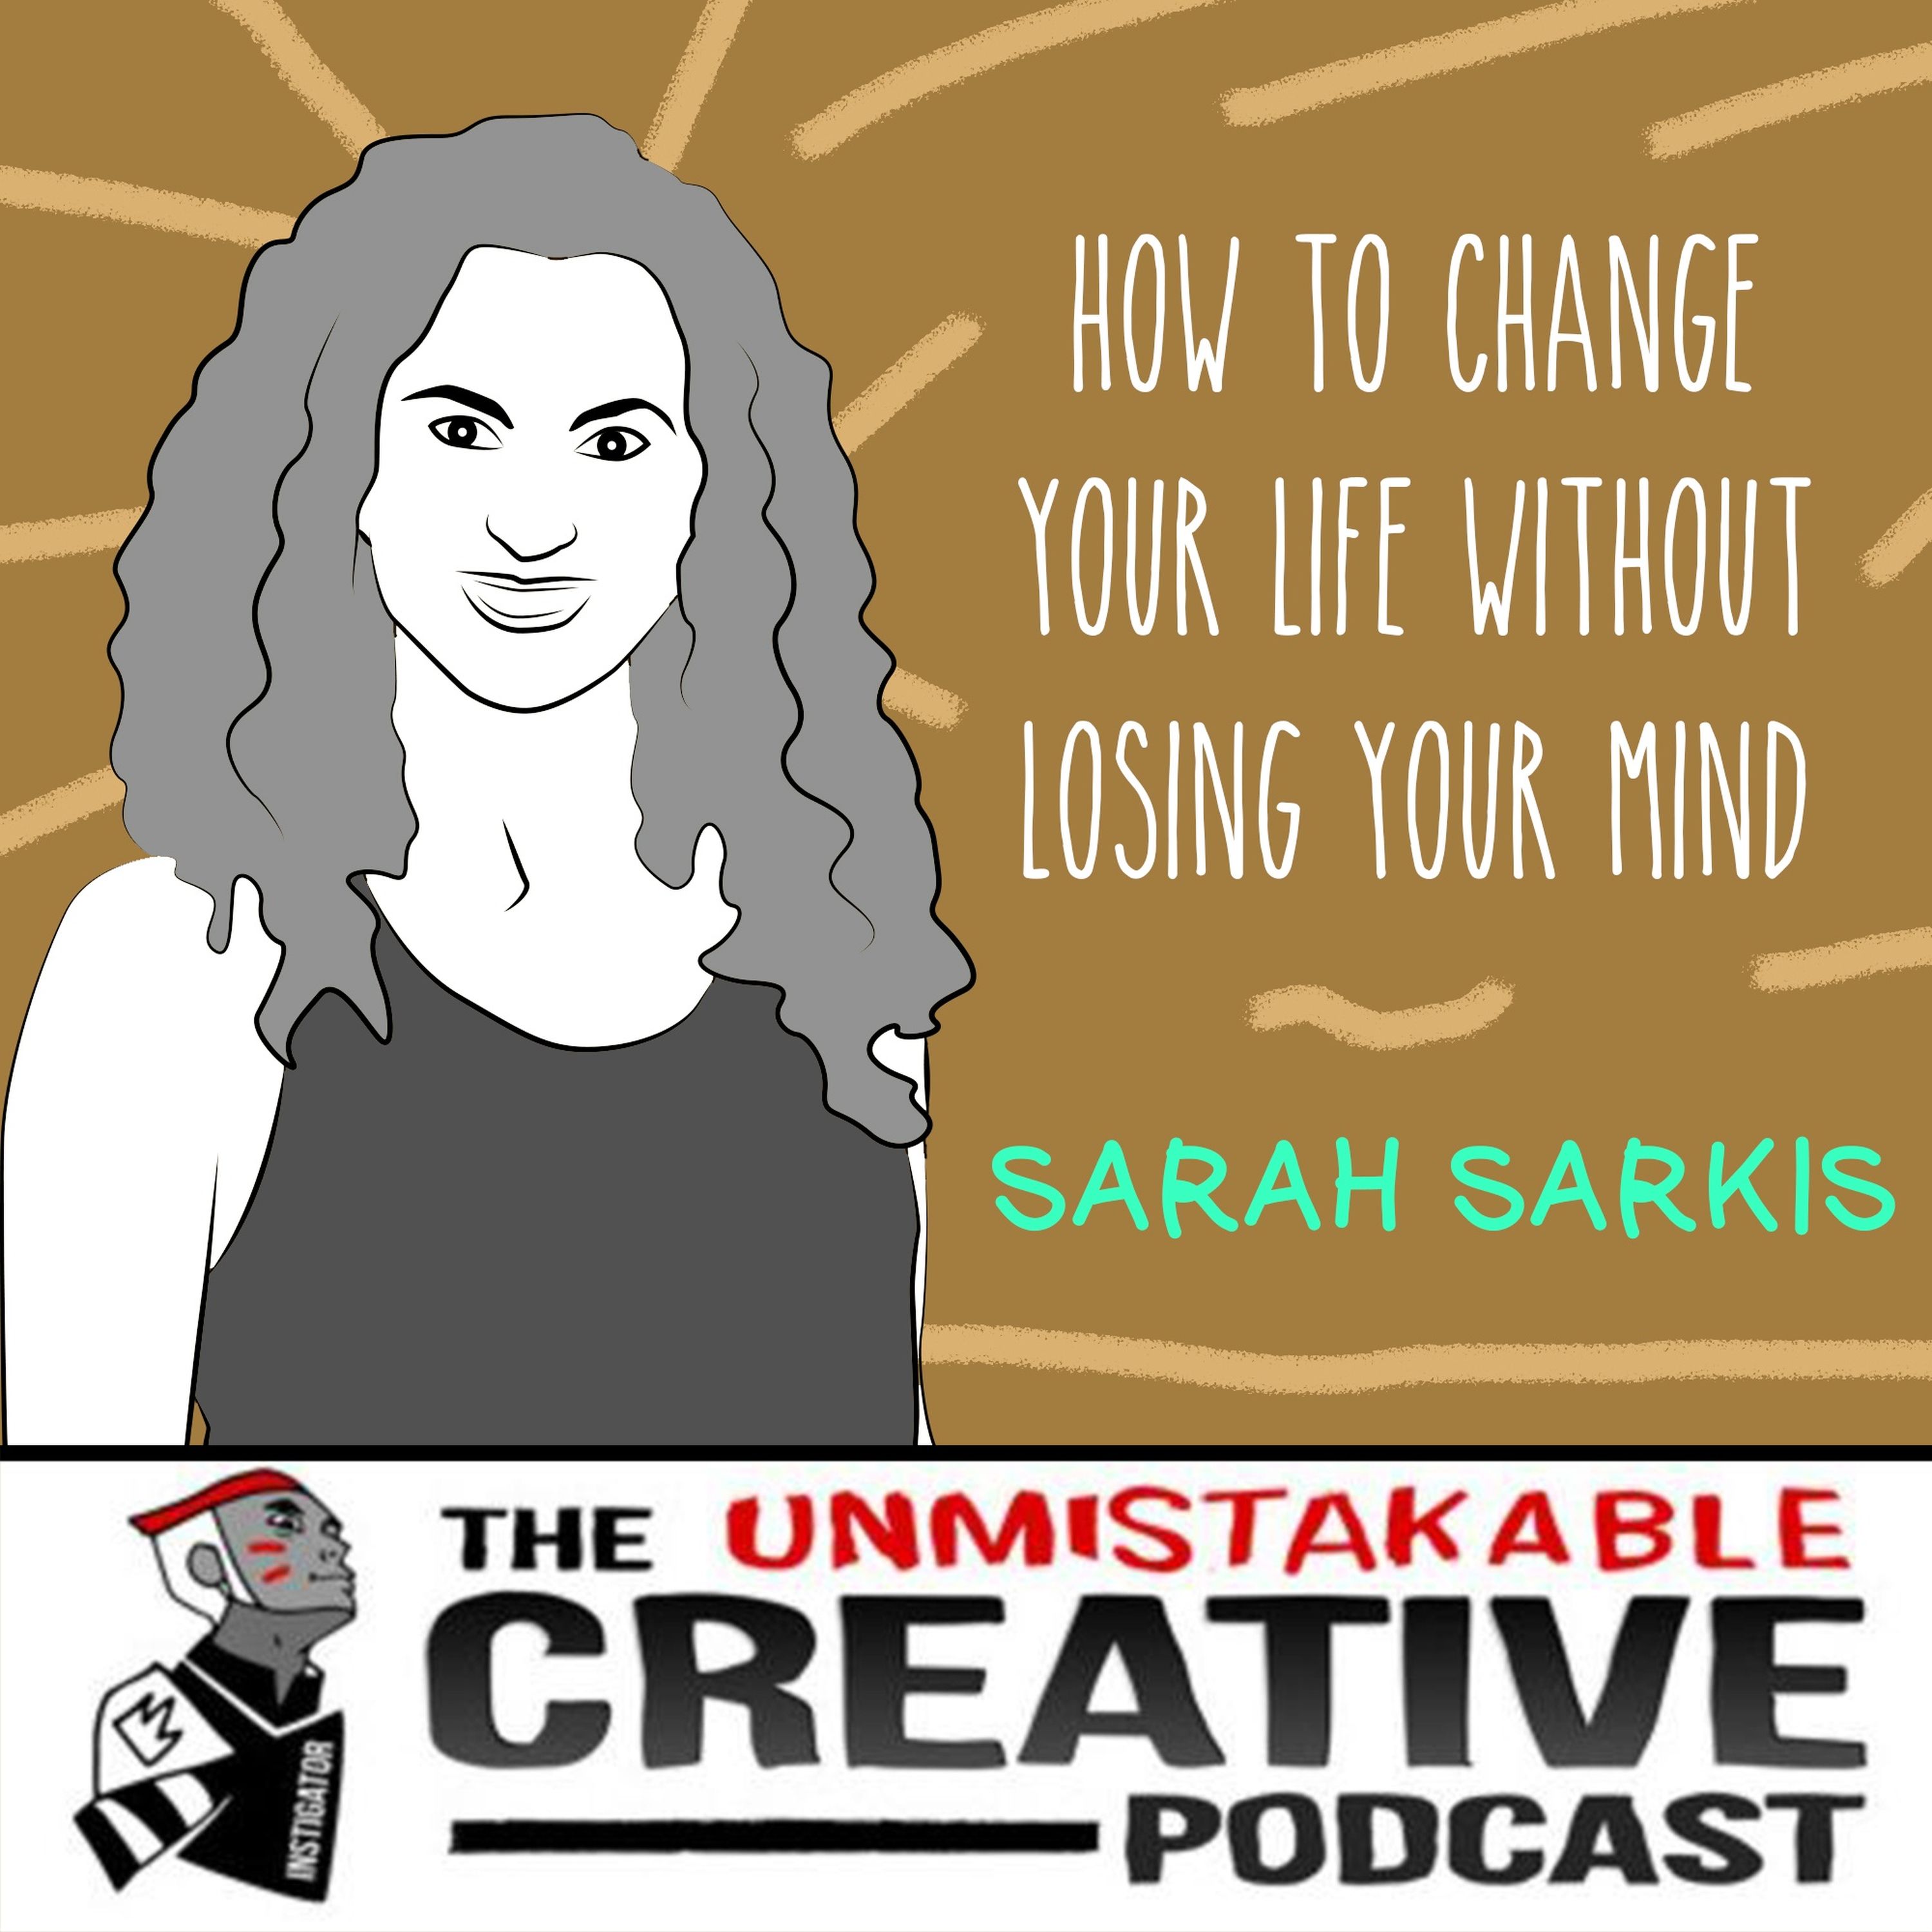 Sarah Sarkis: How to Change Your Life Without Losing Your Mind